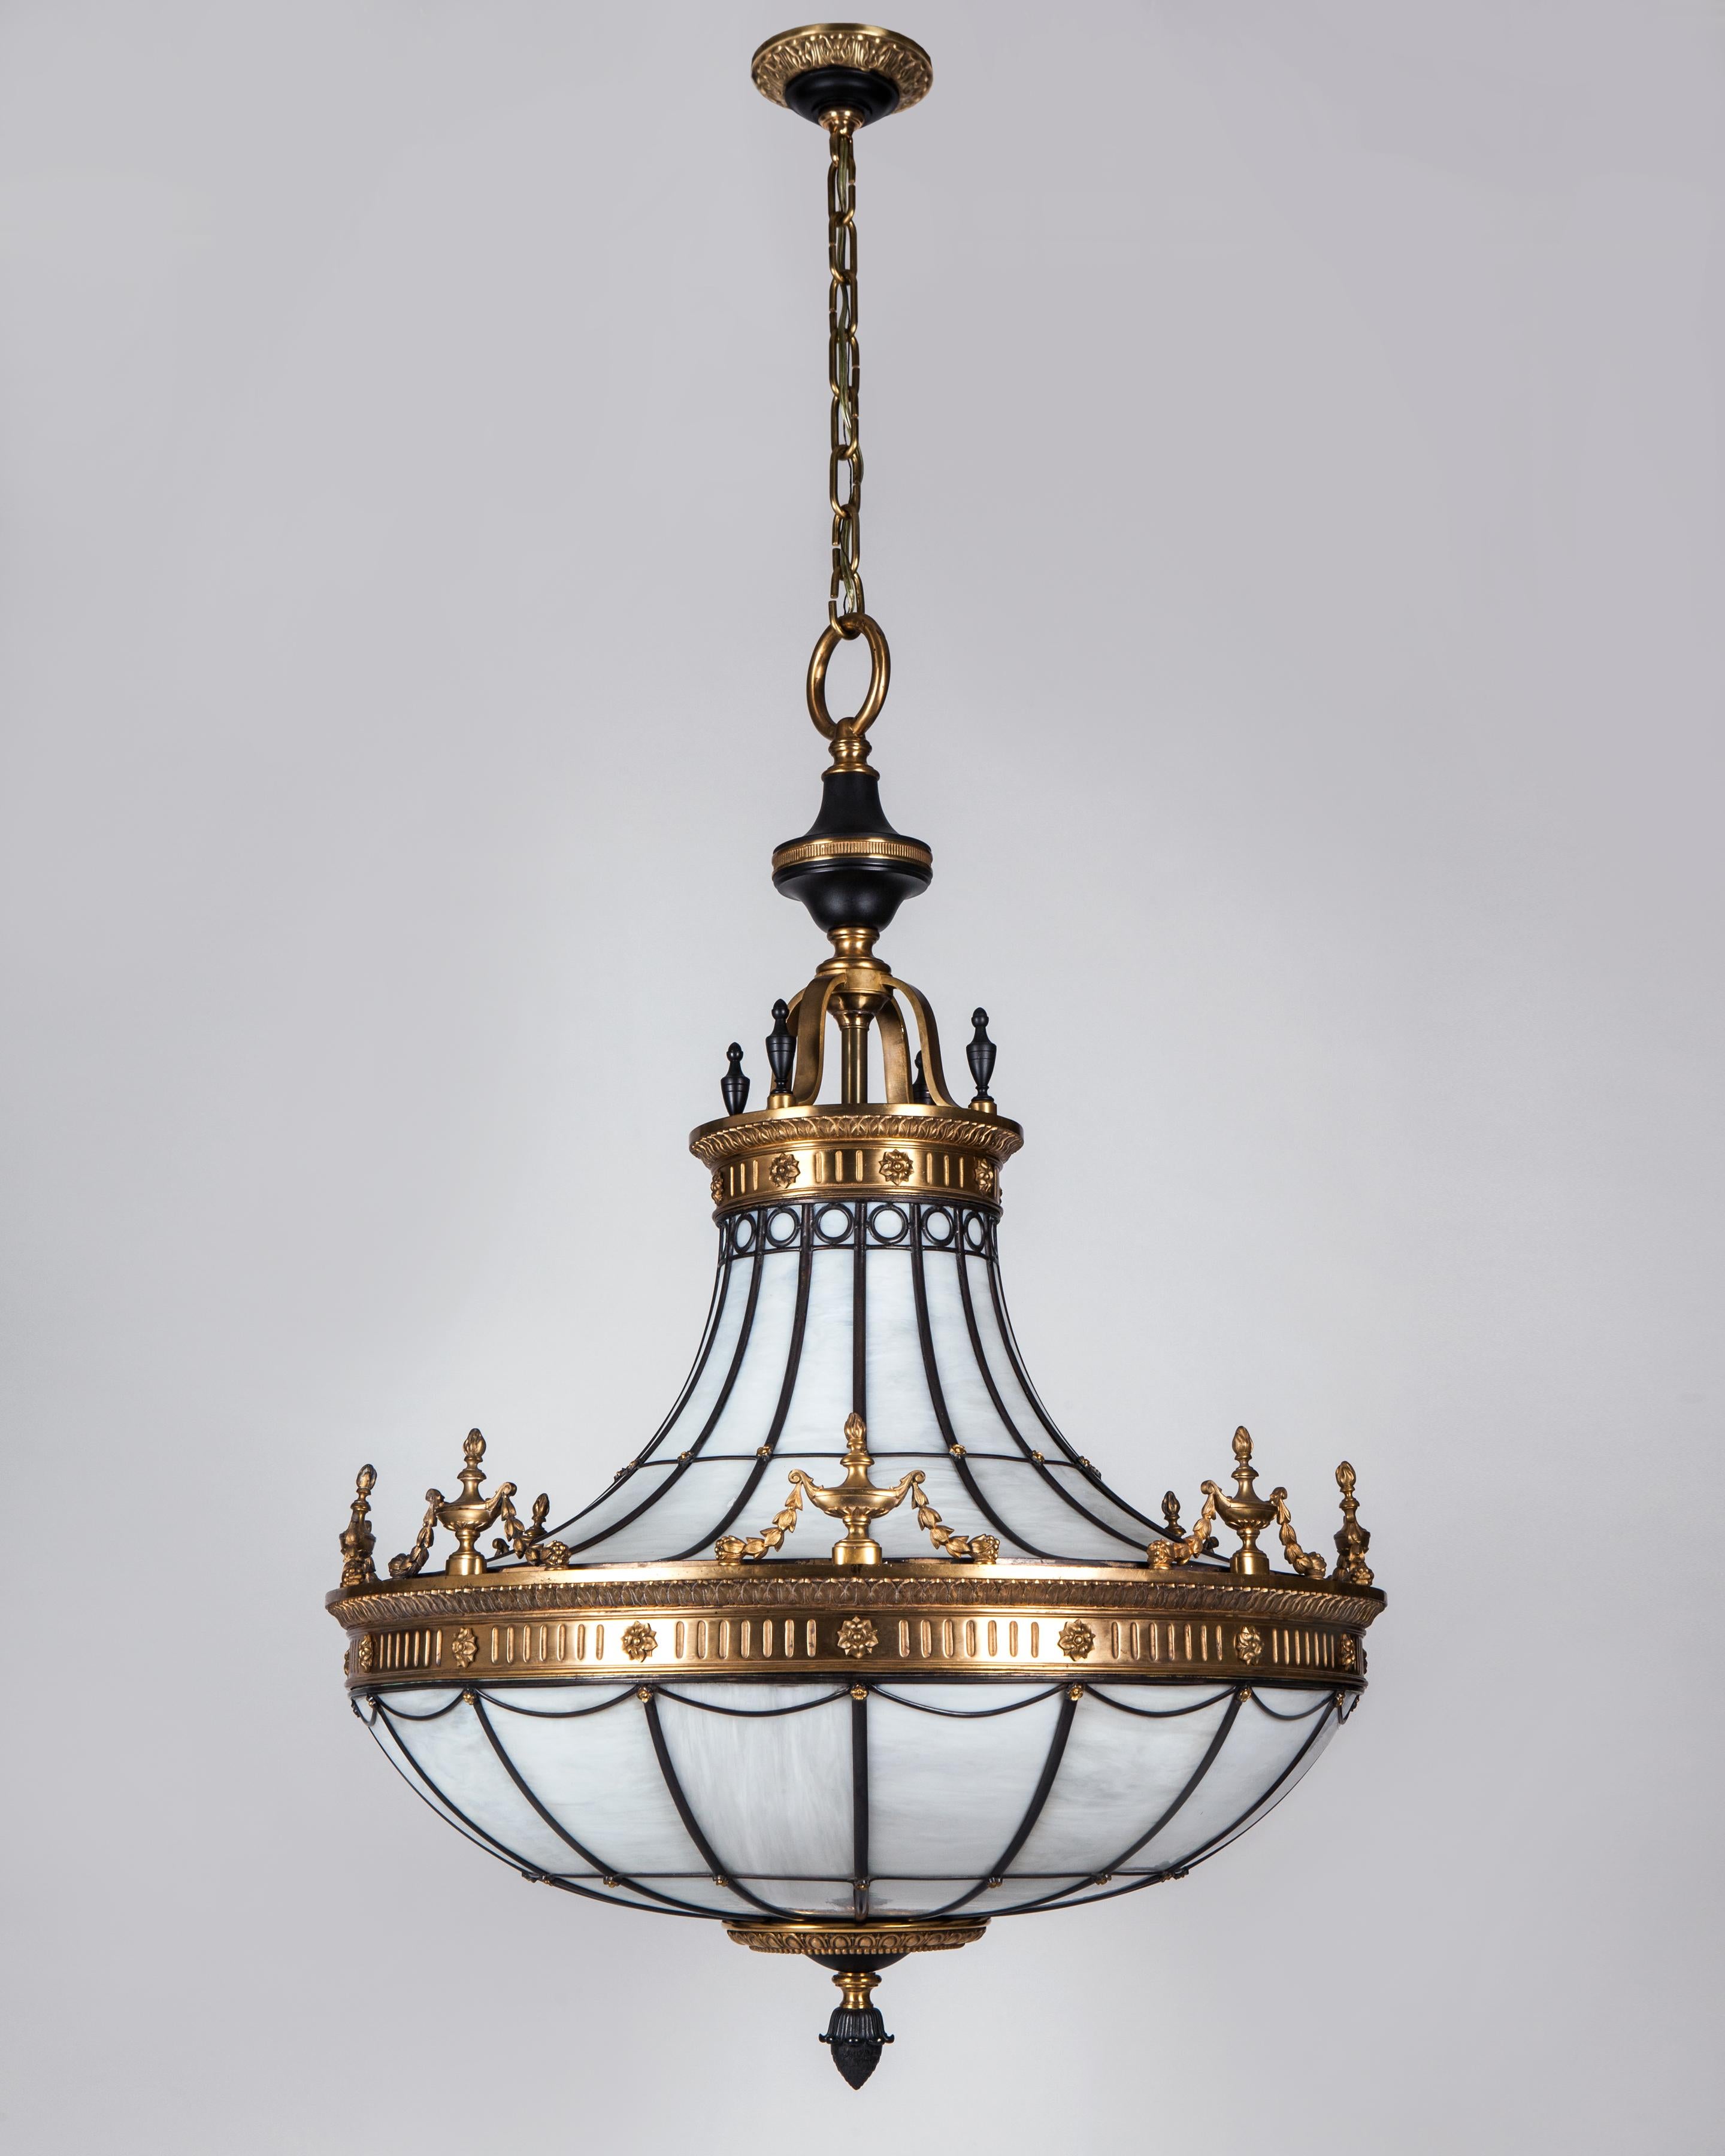 AHL3554

A large antique leaded glass chandelier with bronze framing in a combination of dark and bright-burnished finishes. The metalwork is detailed with twin friezes of leaf-and-dart moldings over rosettes and fluting. Each molding topped with